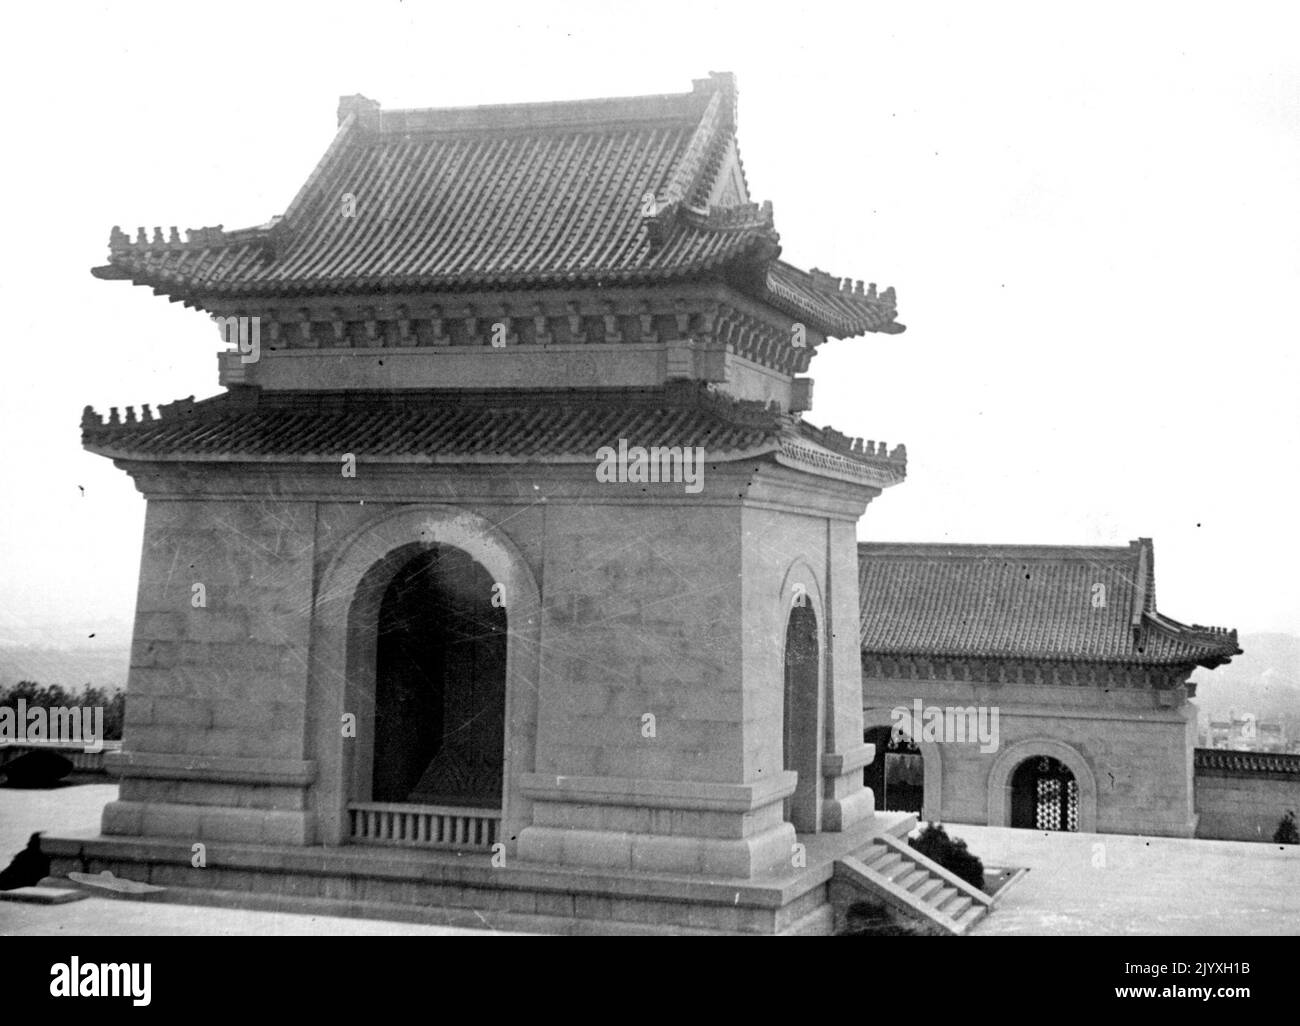 From The Eastern Seat Of War -- Sunyatsen's tomb. When the Japanese troops took possession of Nanking they took likewise possession of the Purple-Hill. On this hill are to be found not only the tombs of the Chinese emperors but the grave of Sunyatesen the head of the Chinese revolution. December 01, 1937. (Photo by Atlantic Photo). Stock Photo